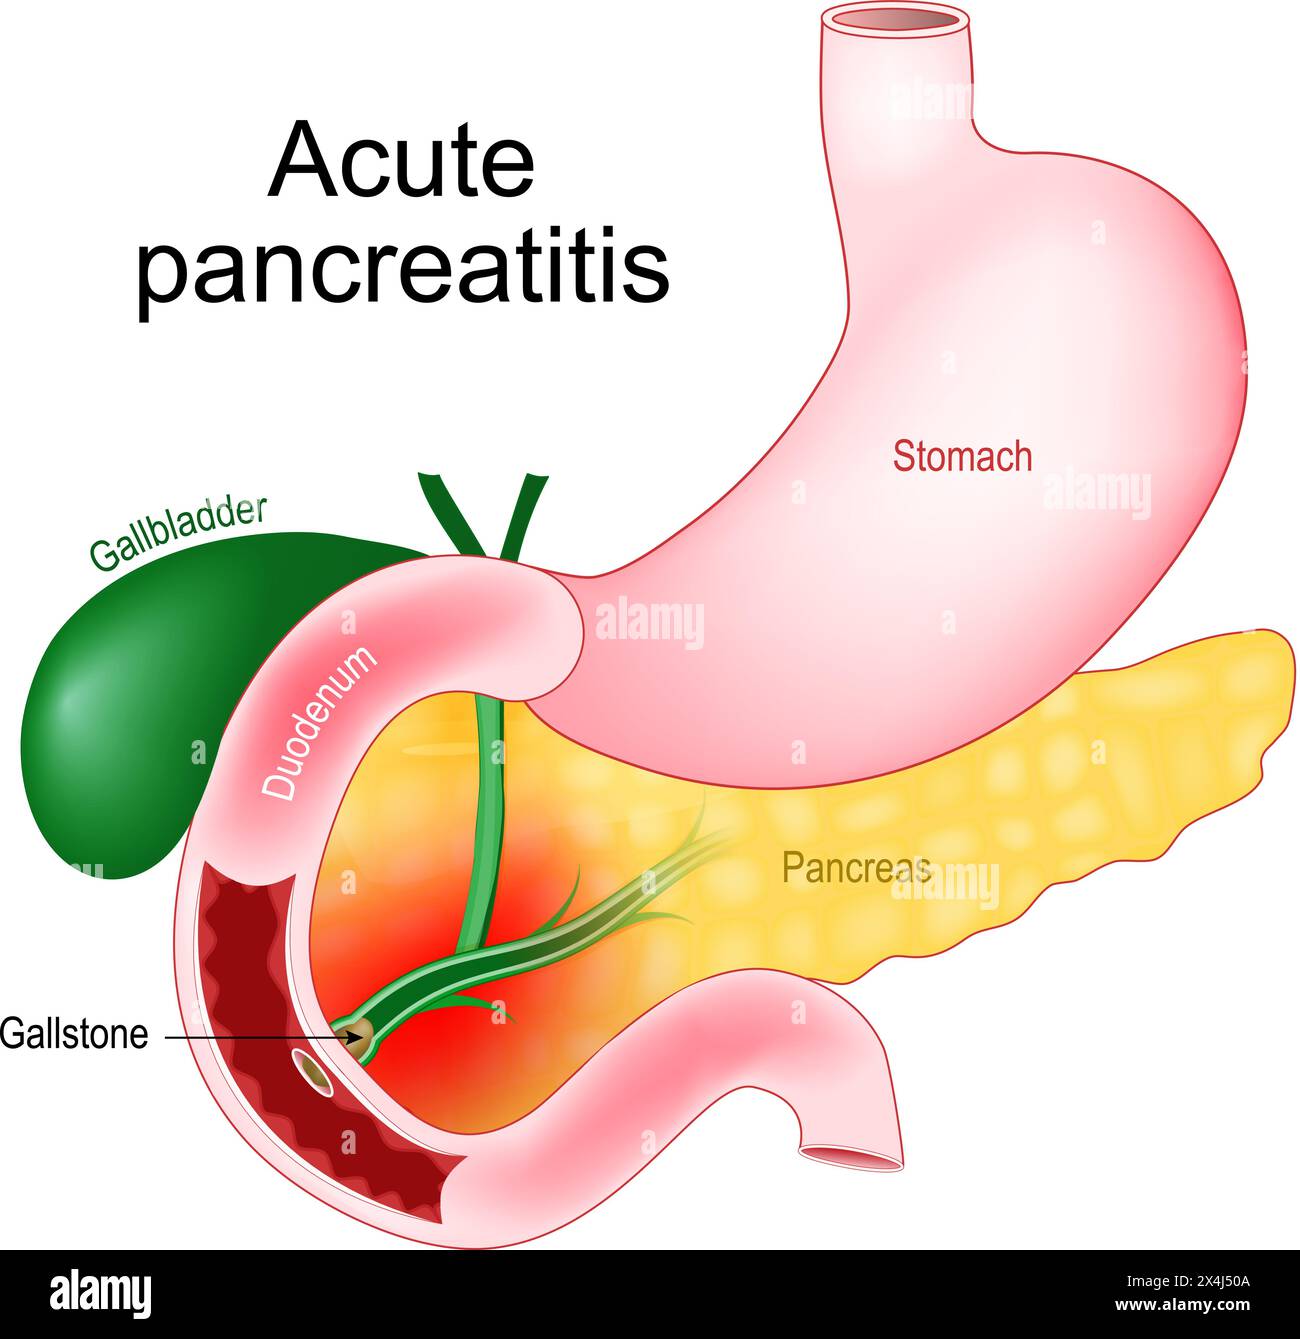 Acute pancreatitis. Pancreas inflammation. Realistic image of abdominal organs Gallbladder, Duodenum, Stomach, and Pancreas. Close-up of a Gallstone t Stock Vector